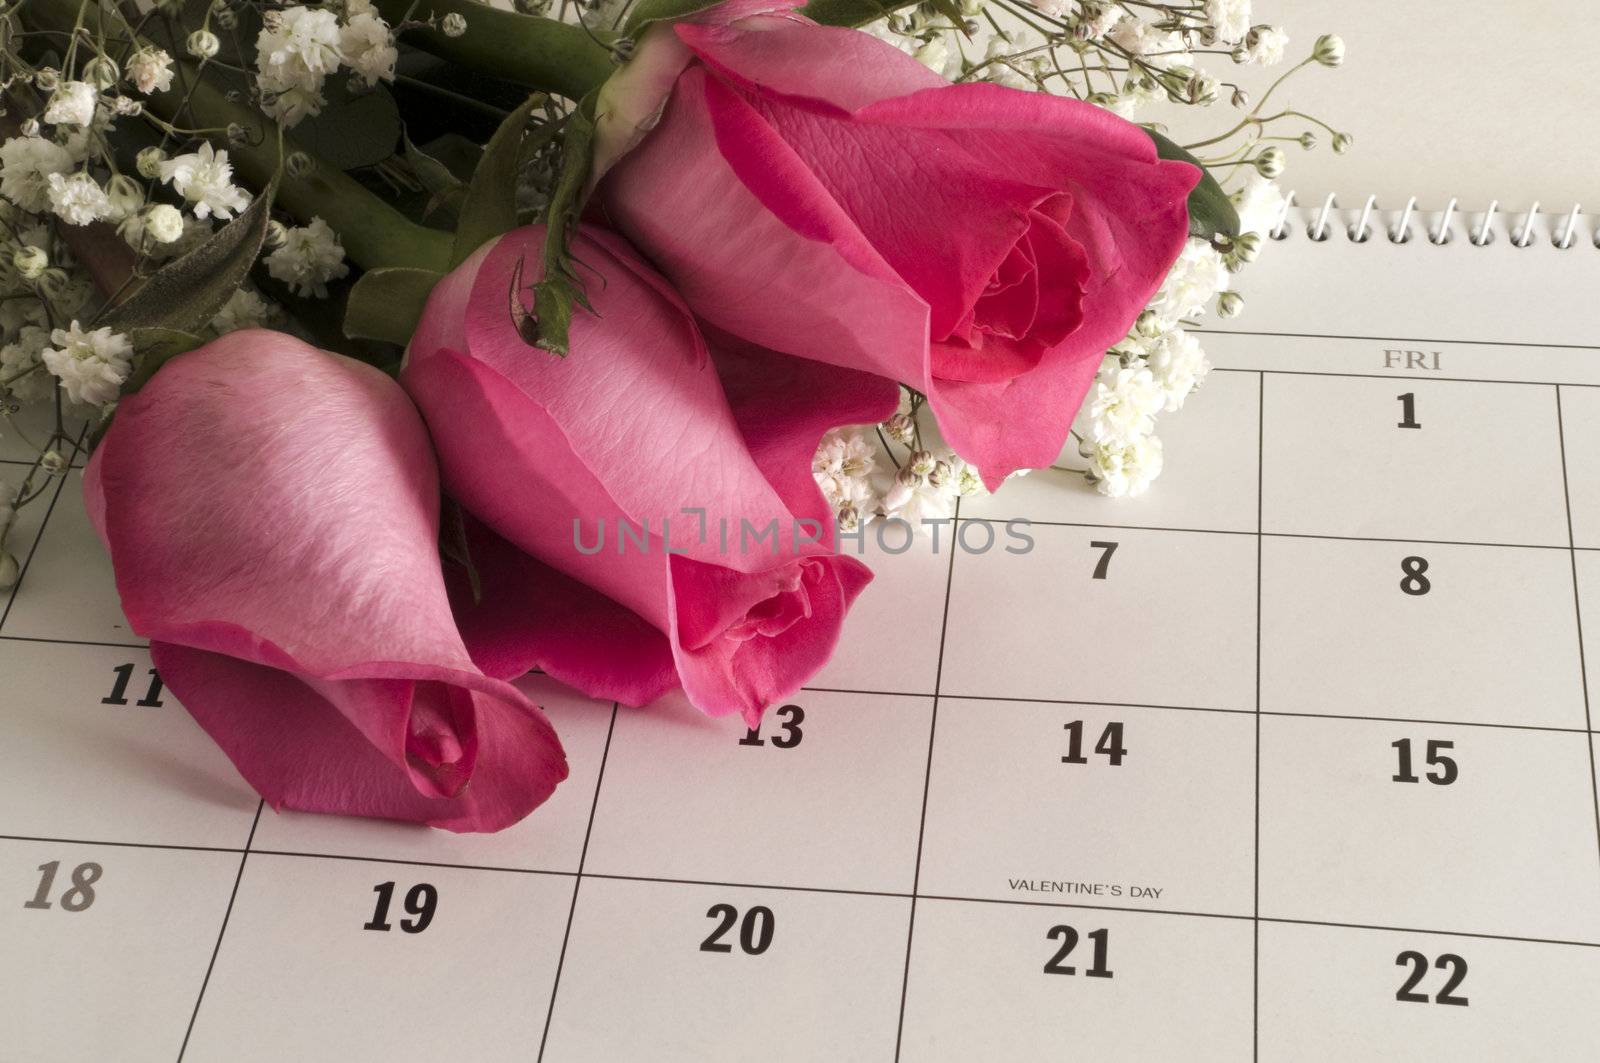 Three pink roses on a calender open to Valentine's Day.